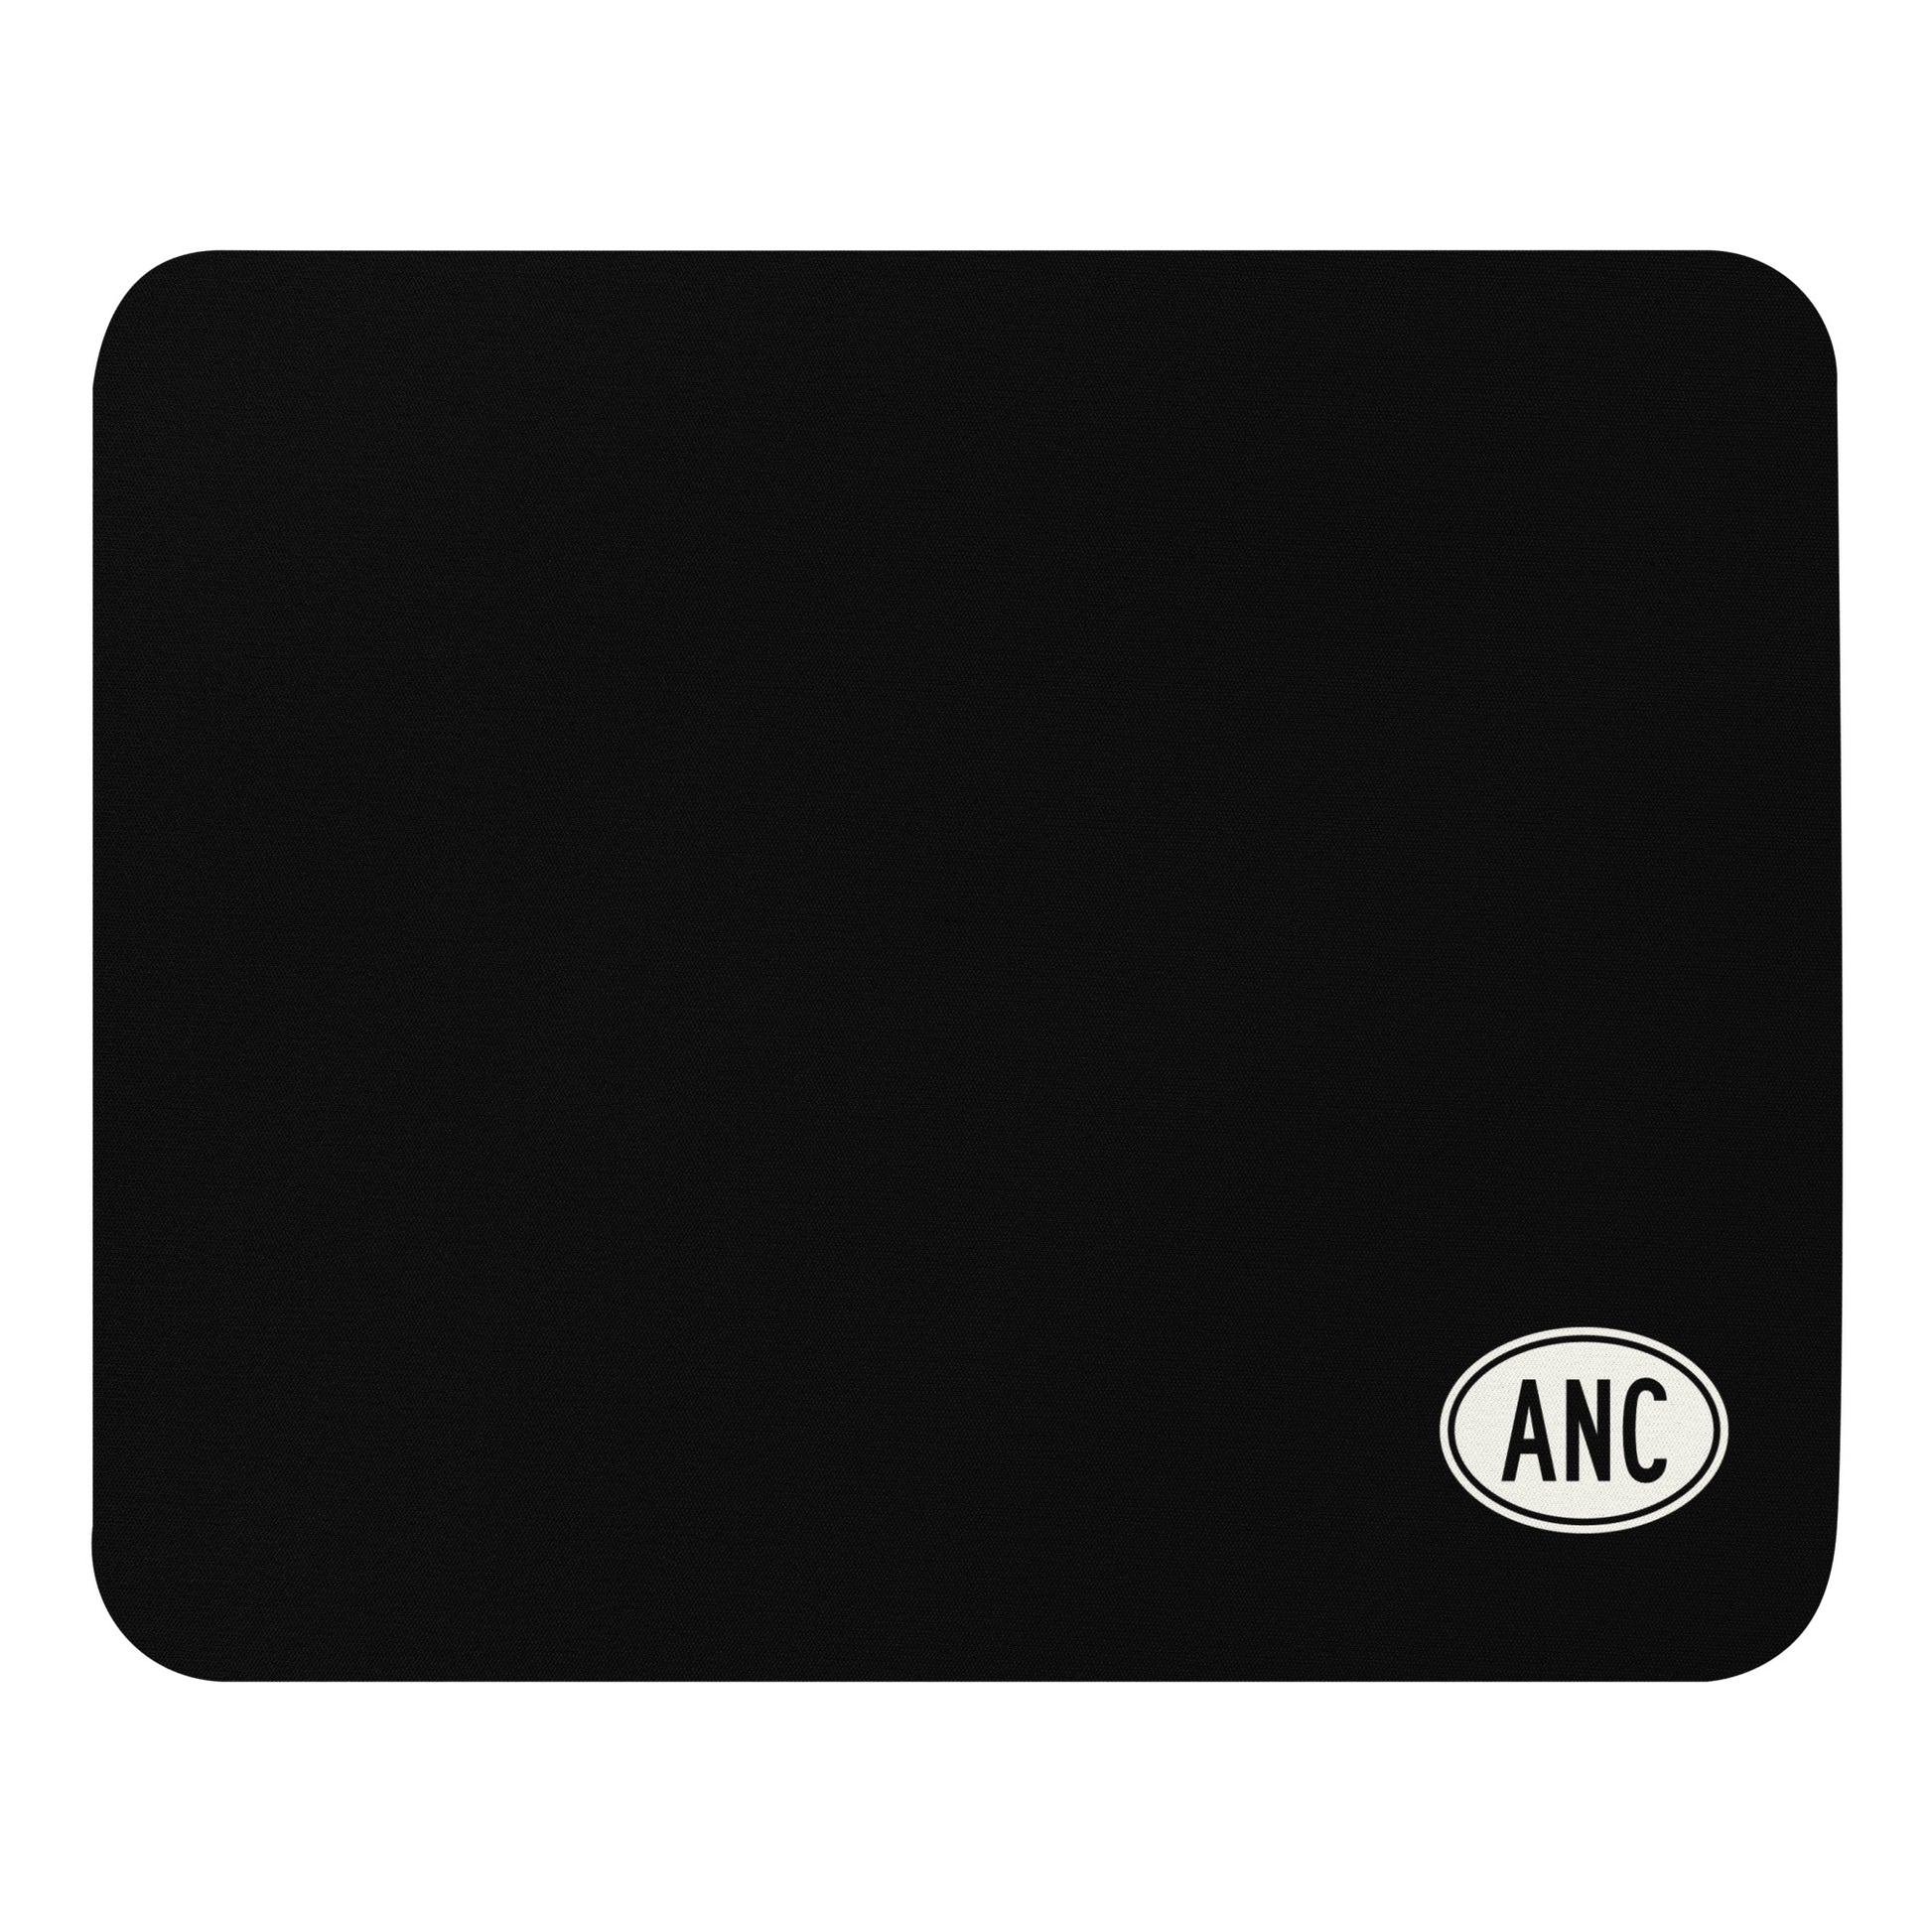 Unique Travel Gift Mouse Pad - White Oval • ANC Anchorage • YHM Designs - Image 01